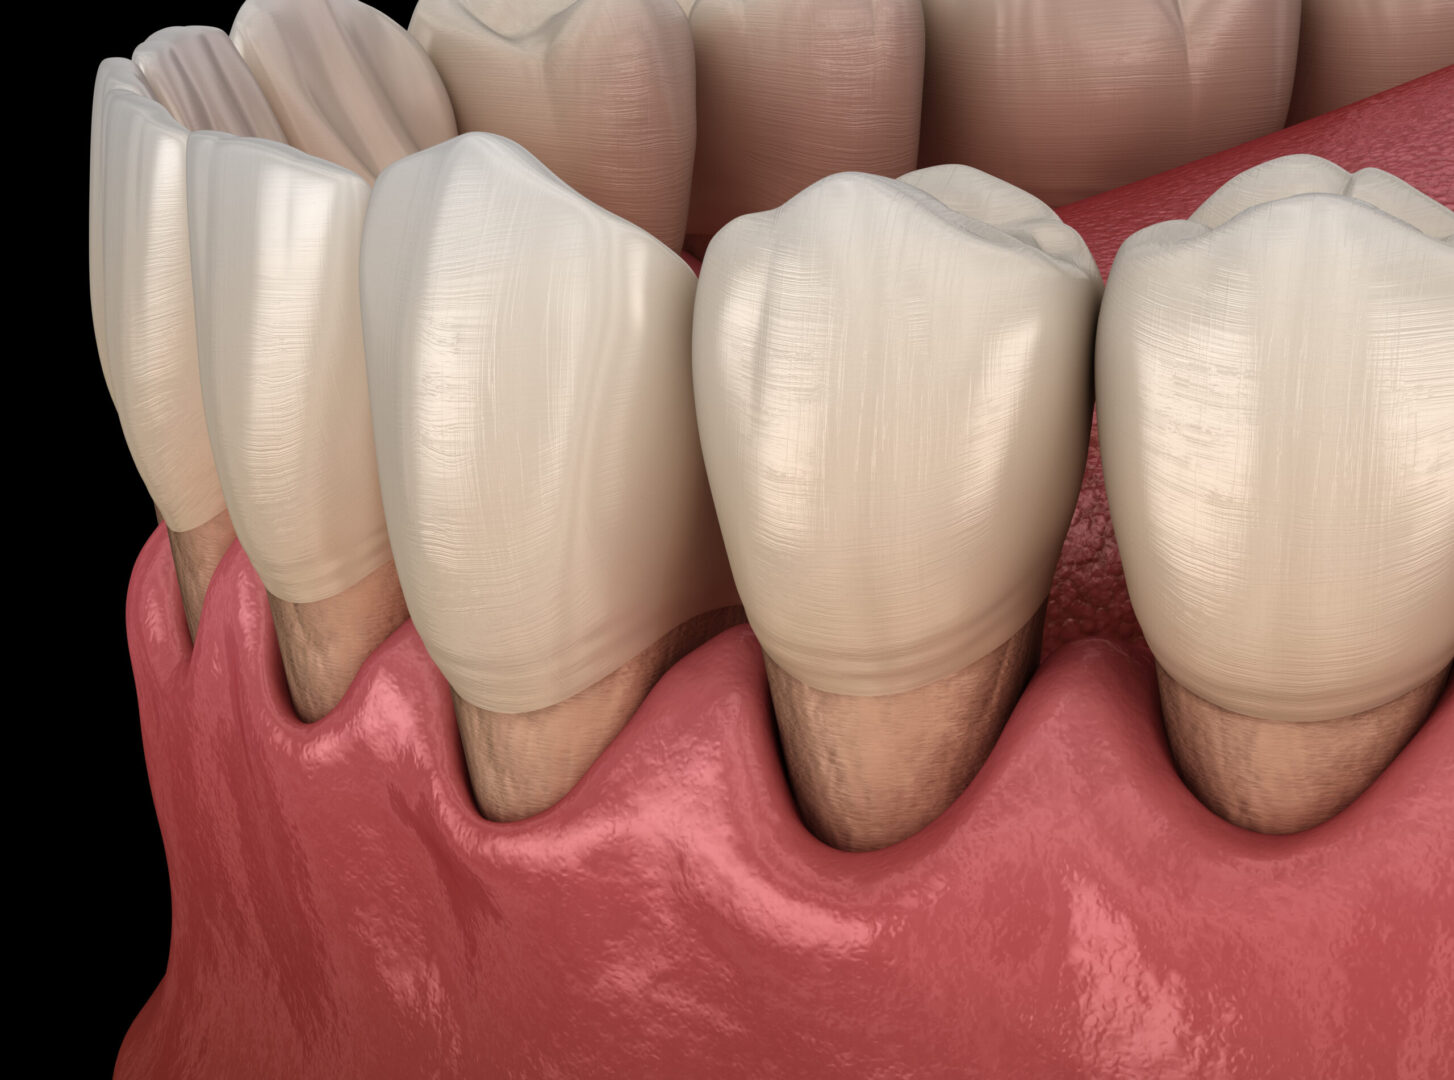 gingival grafting can solve gum recession at Aspire Surgical in Salt Lake City, UT